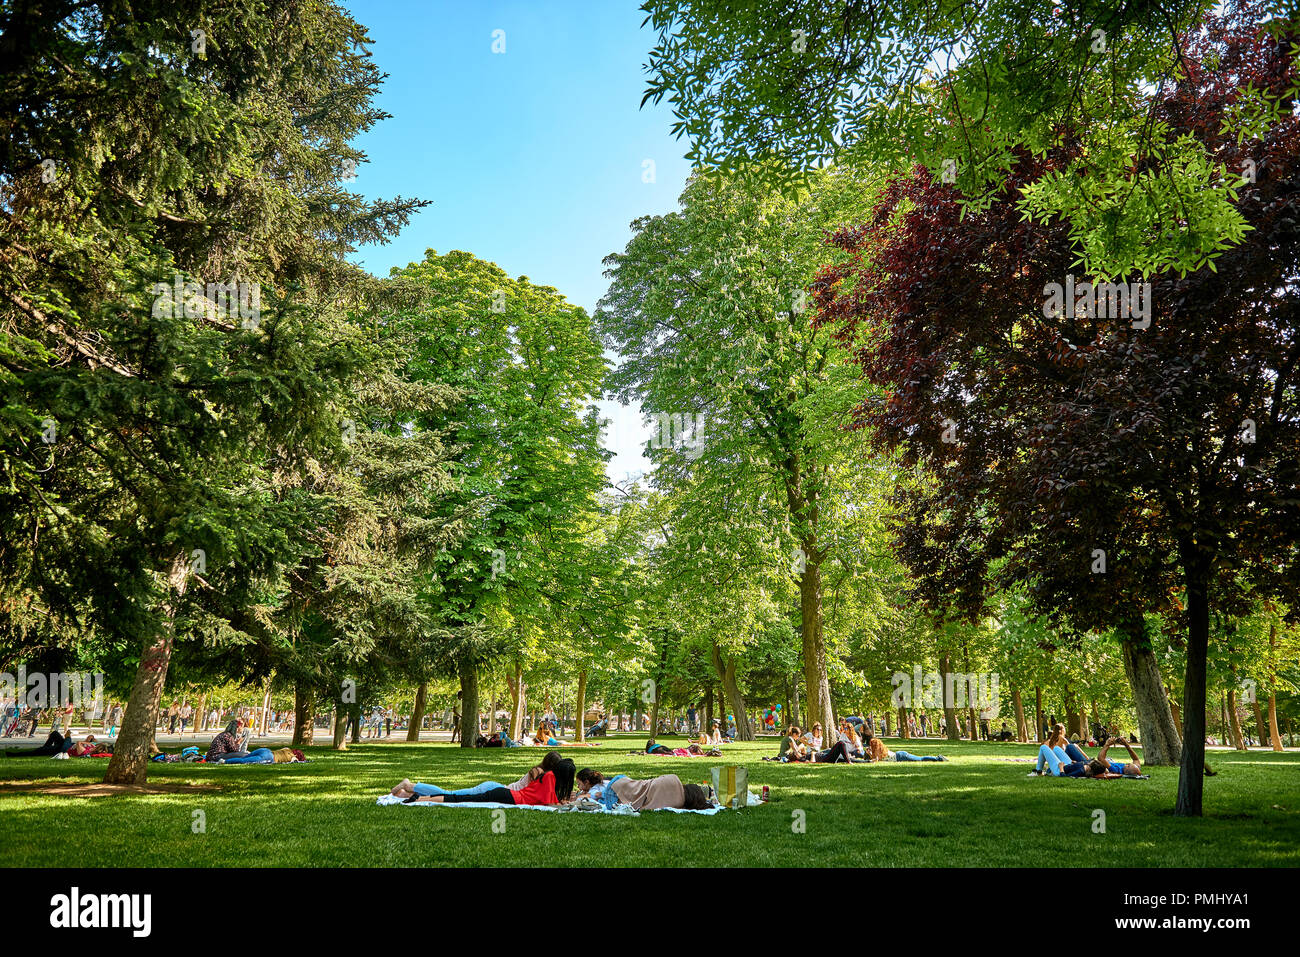 Group of people enjoying a social gathering in the park lying down on the grass Stock Photo